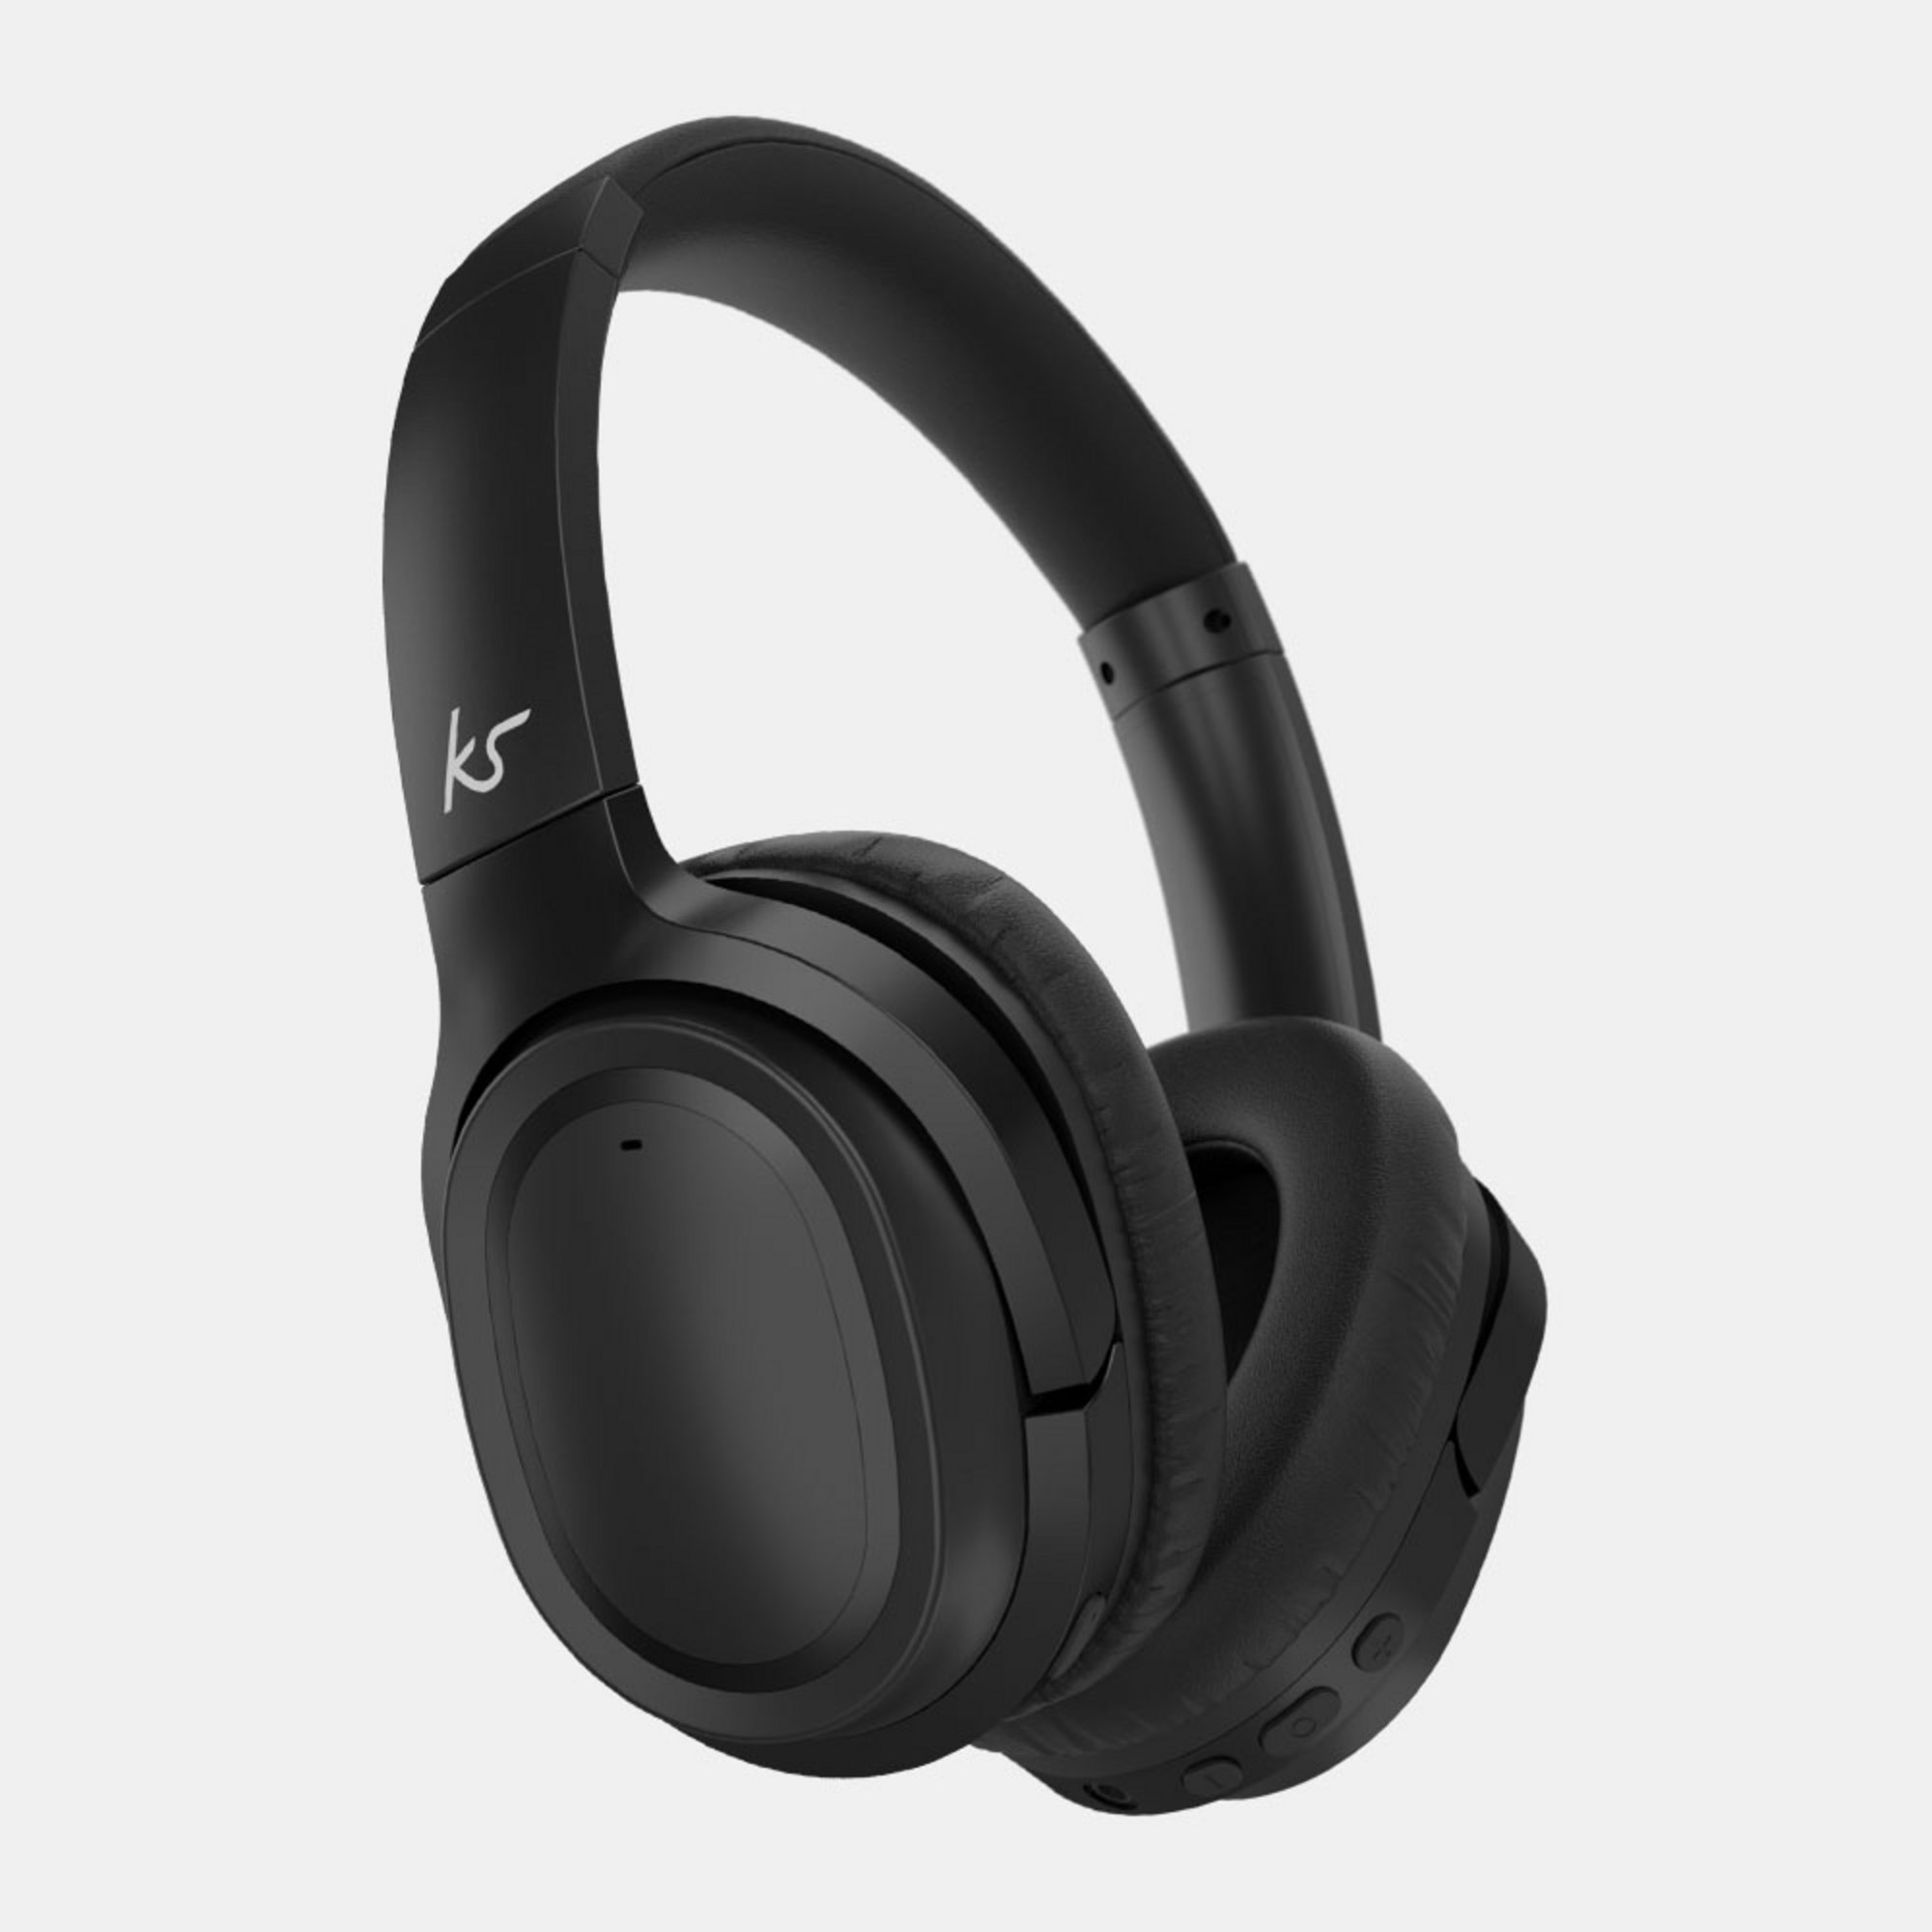 View more Engage 2 ANC Wireless Headphones Black details